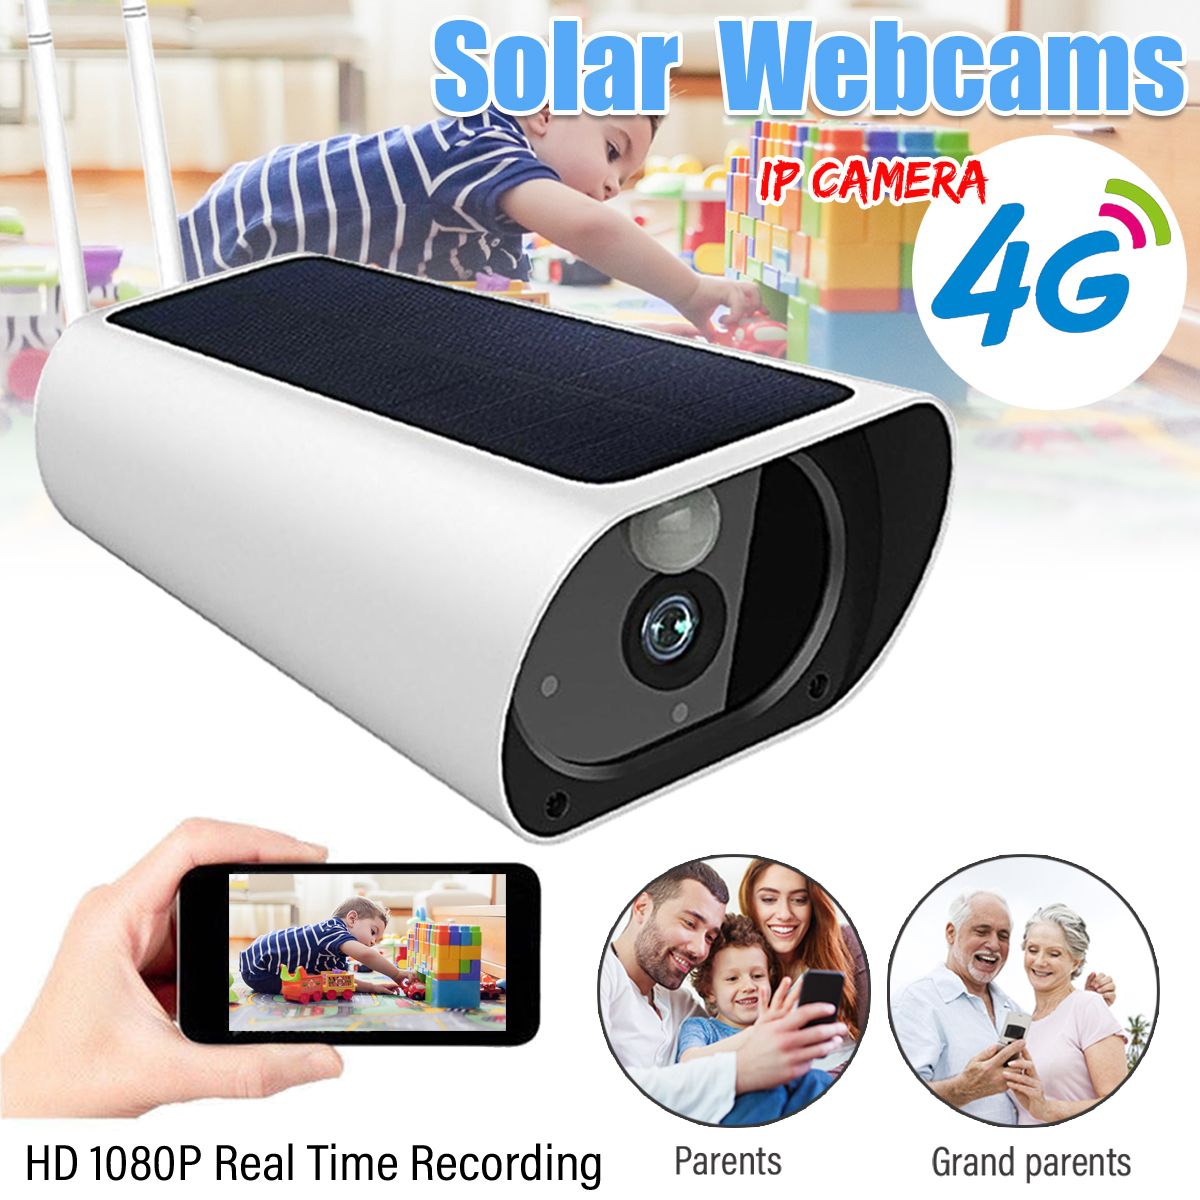 Q3-HD-1080P-Solar-Wireless-Outdoor-Security-IP-Camera-IP67-Night-Vision-Motion-Detect-Infrared-Night-1560915